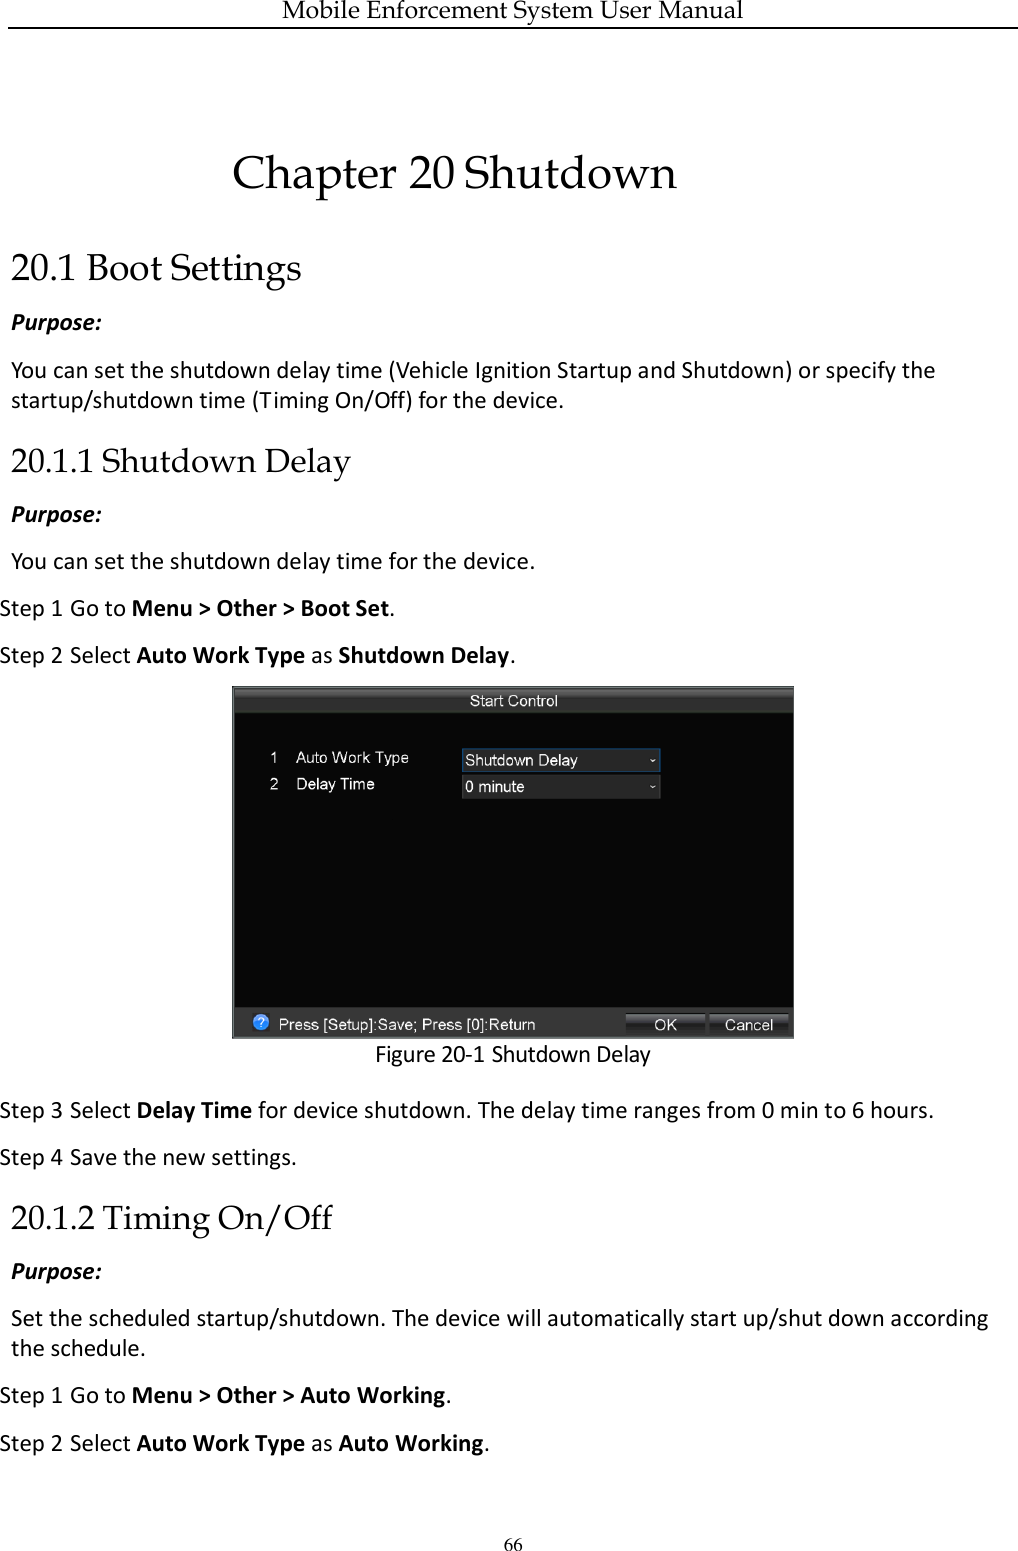 Mobile Enforcement System User Manual 66 Chapter 20 Shutdown 20.1 Boot Settings Purpose: You can set the shutdown delay time (Vehicle Ignition Startup and Shutdown) or specify the startup/shutdown time (Timing On/Off) for the device. 20.1.1 Shutdown Delay Purpose:   You can set the shutdown delay time for the device. Step 1 Go to Menu &gt; Other &gt; Boot Set. Step 2 Select Auto Work Type as Shutdown Delay.  Figure 20-1 Shutdown Delay Step 3 Select Delay Time for device shutdown. The delay time ranges from 0 min to 6 hours. Step 4 Save the new settings. 20.1.2 Timing On/Off Purpose:   Set the scheduled startup/shutdown. The device will automatically start up/shut down according the schedule. Step 1 Go to Menu &gt; Other &gt; Auto Working. Step 2 Select Auto Work Type as Auto Working. 